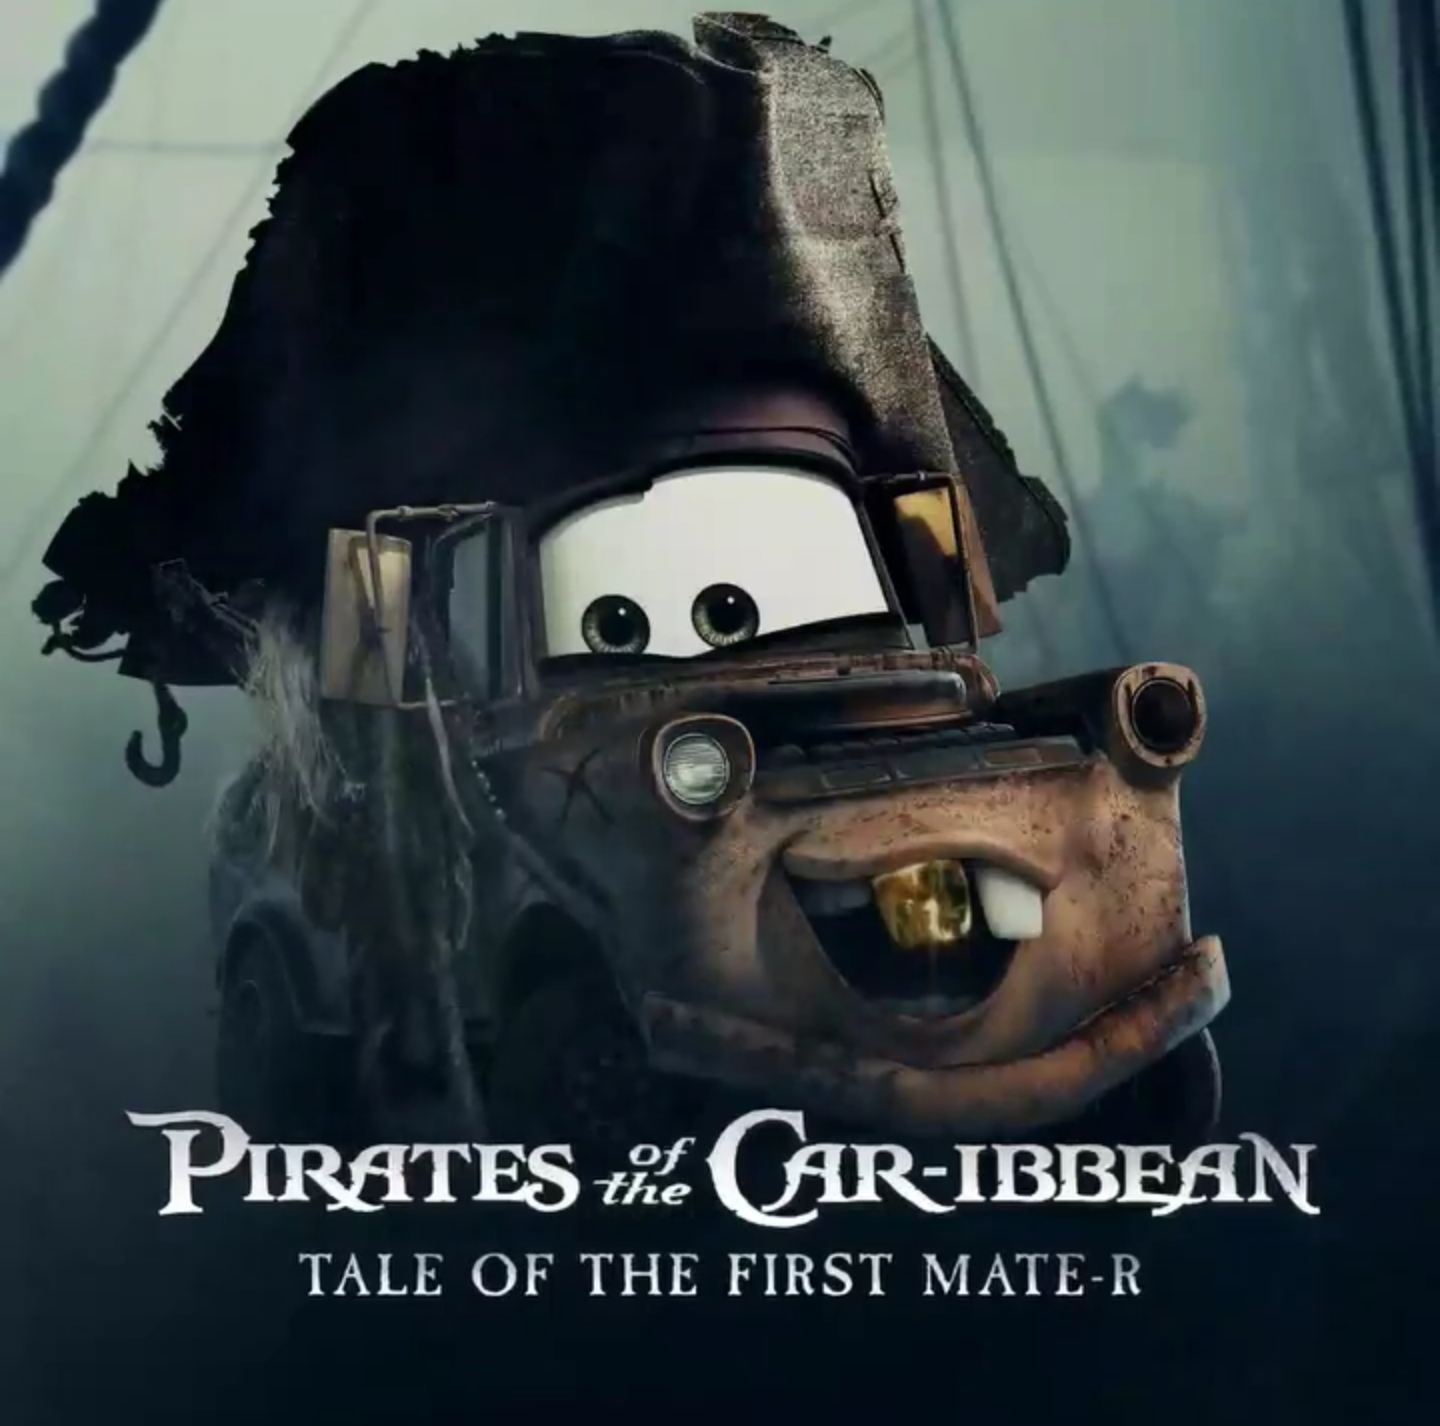 Pirates of the Caribbean Tale of the First MateR World of Cars